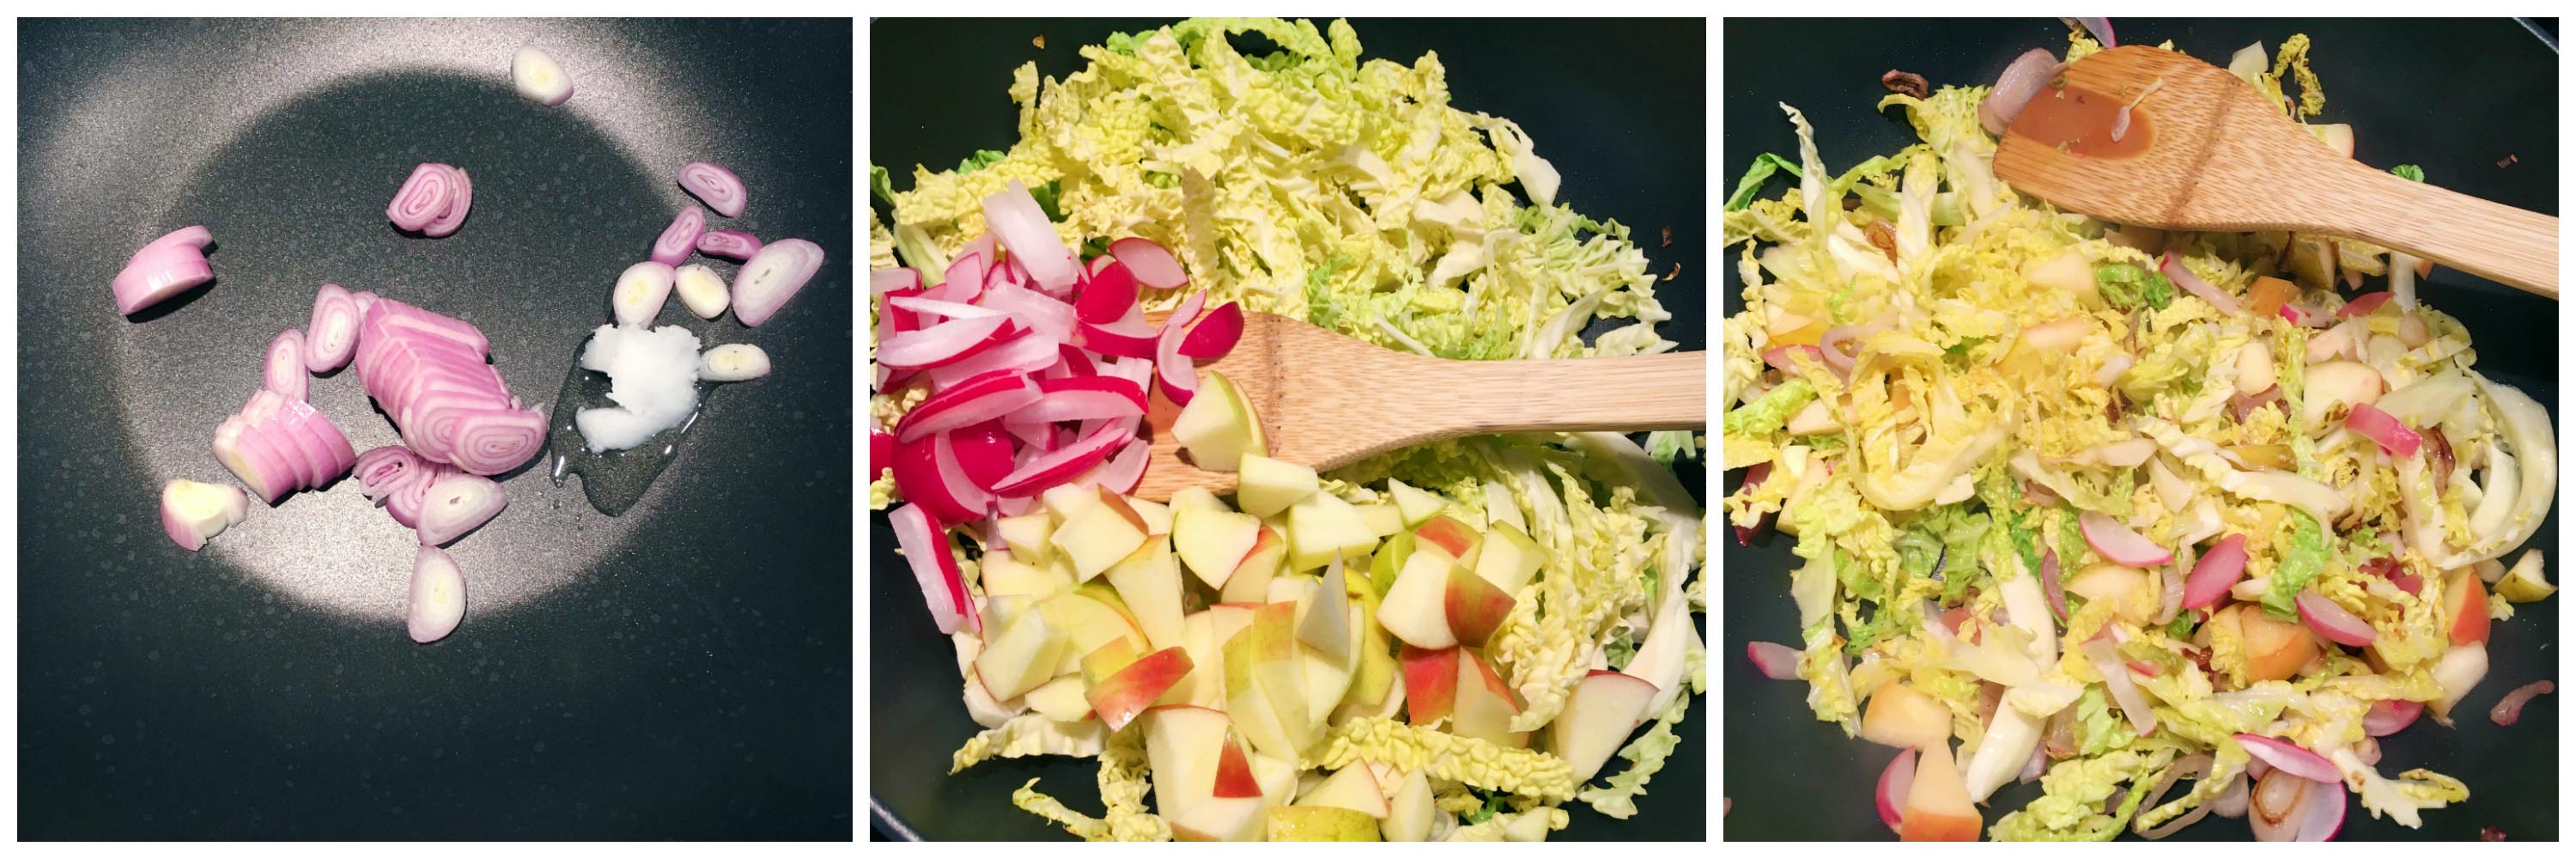 Stir-Fried Savoy Cabbage with Apple - in the making